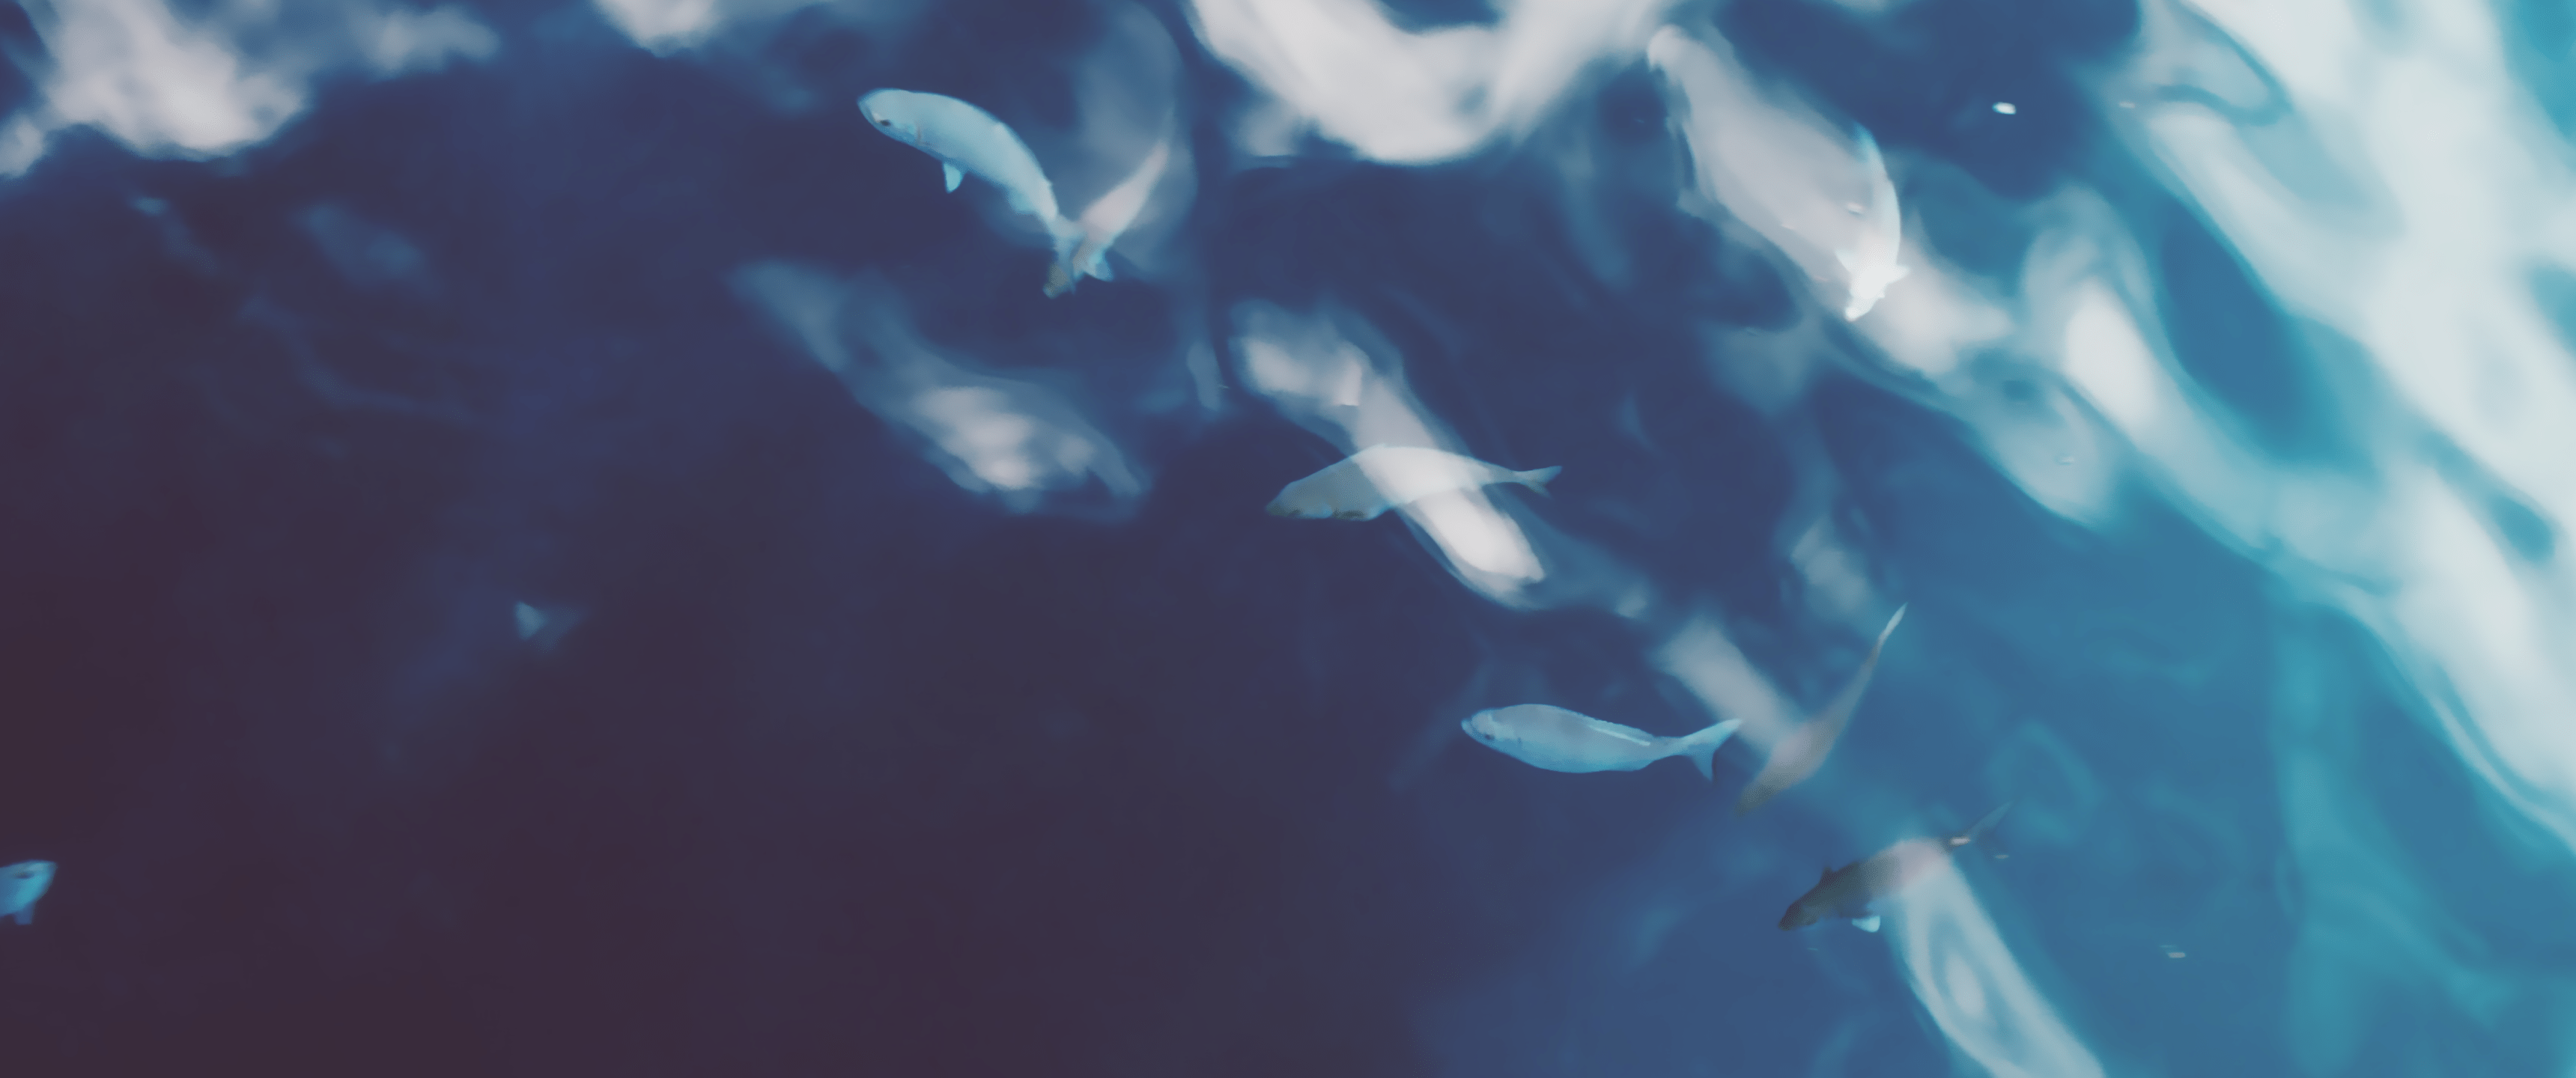 A group of fish swimming in a blue ocean. - Underwater, 3440x1440